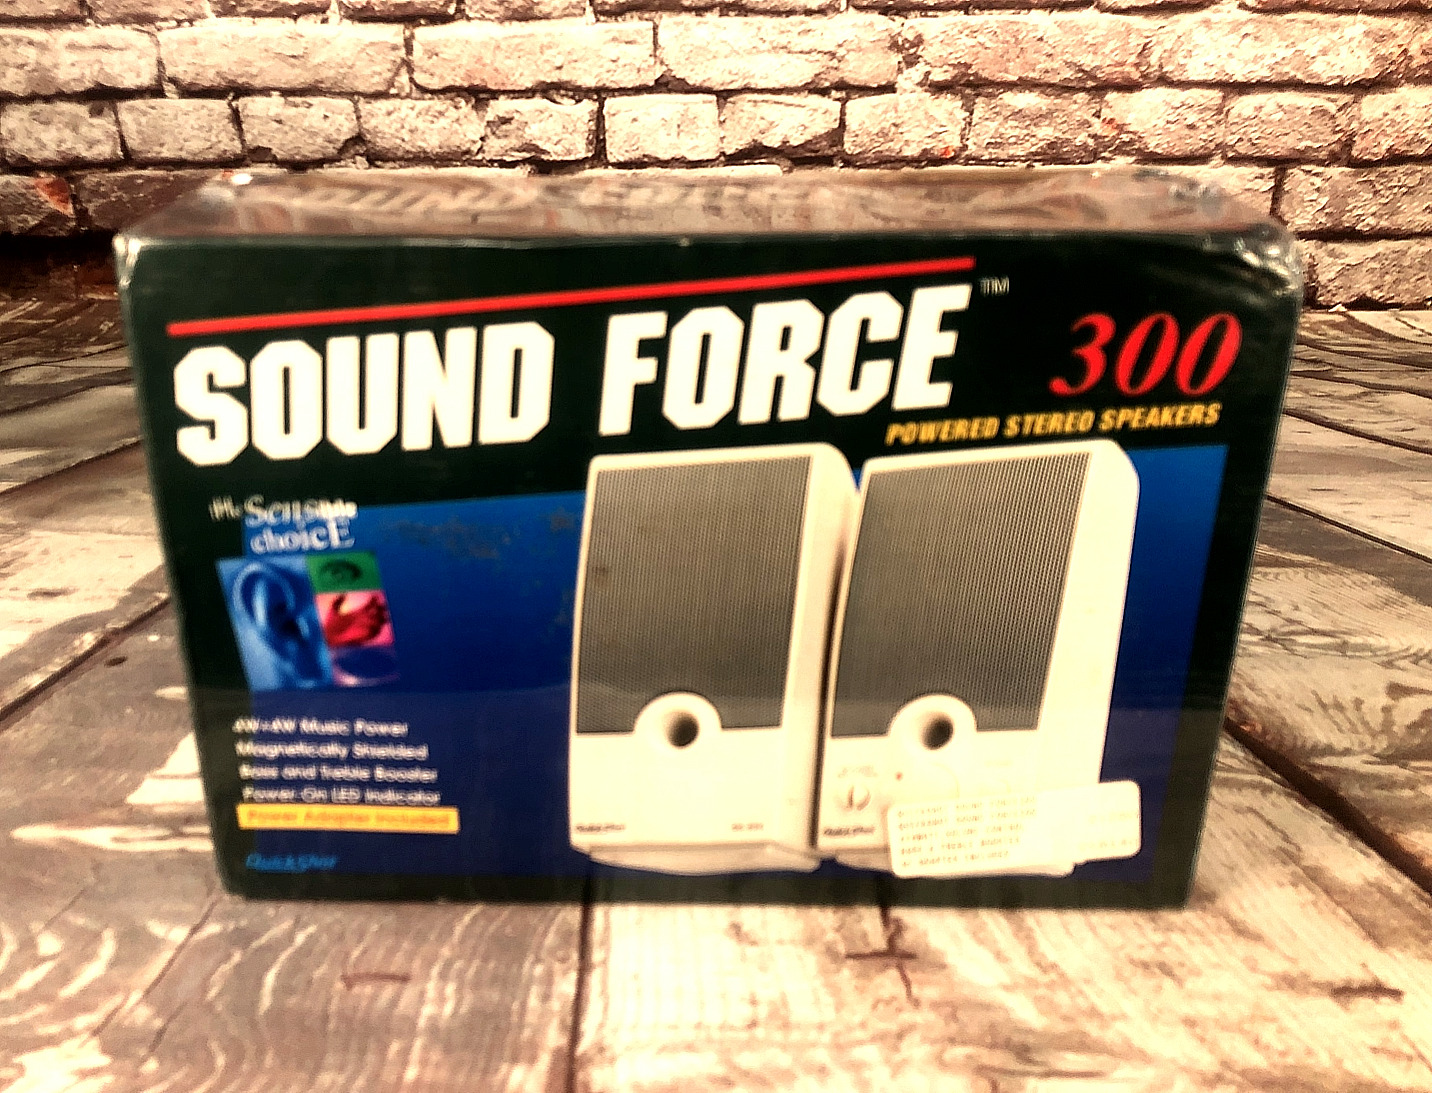 Sound Force 300 Powered Stereo Speakers BRAND NEW 1994 NOS Vintage